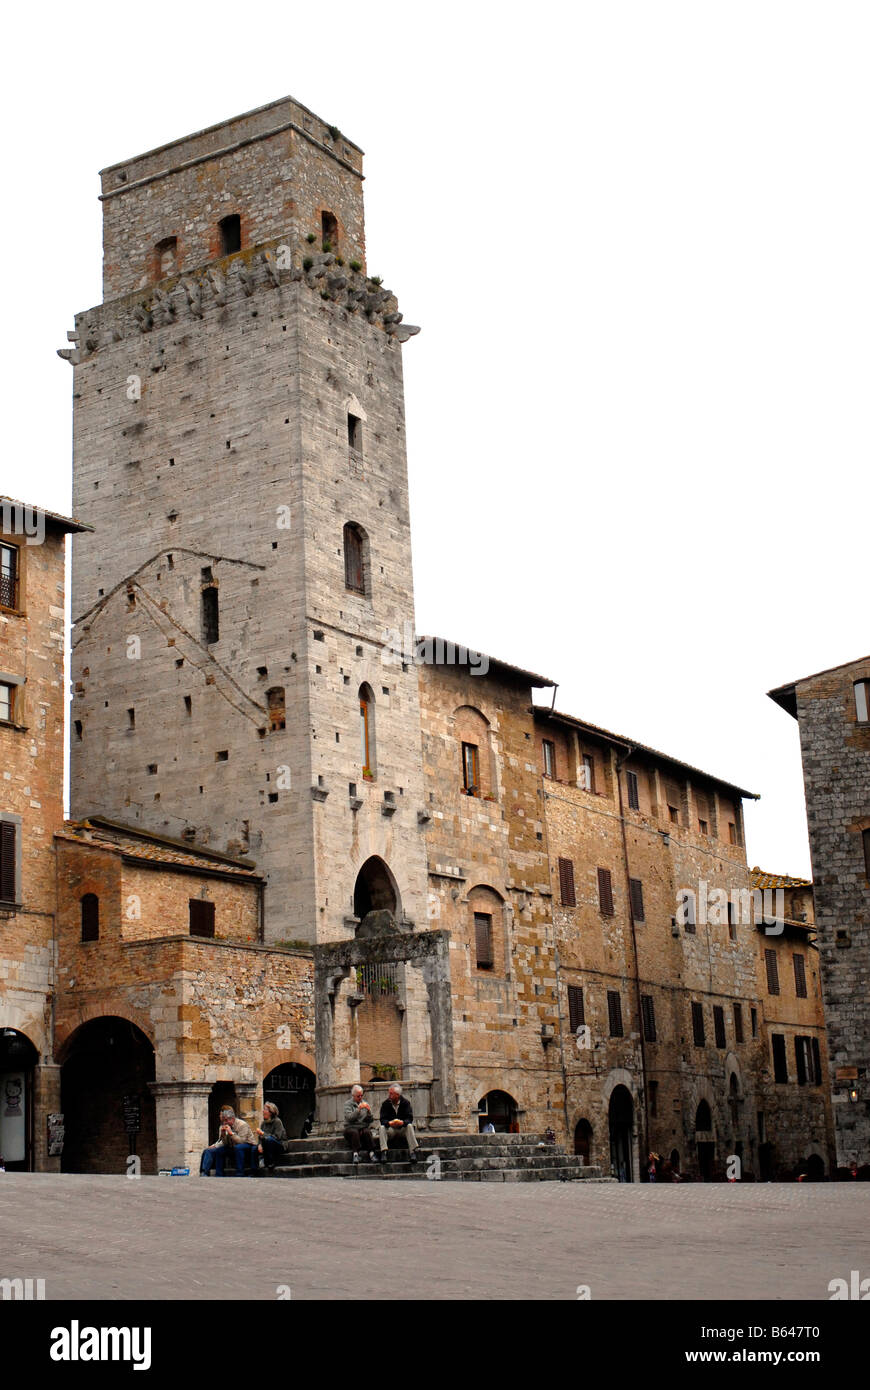 Buildings in the old town of San Gimignano in Tuscany, Italy Stock Photo